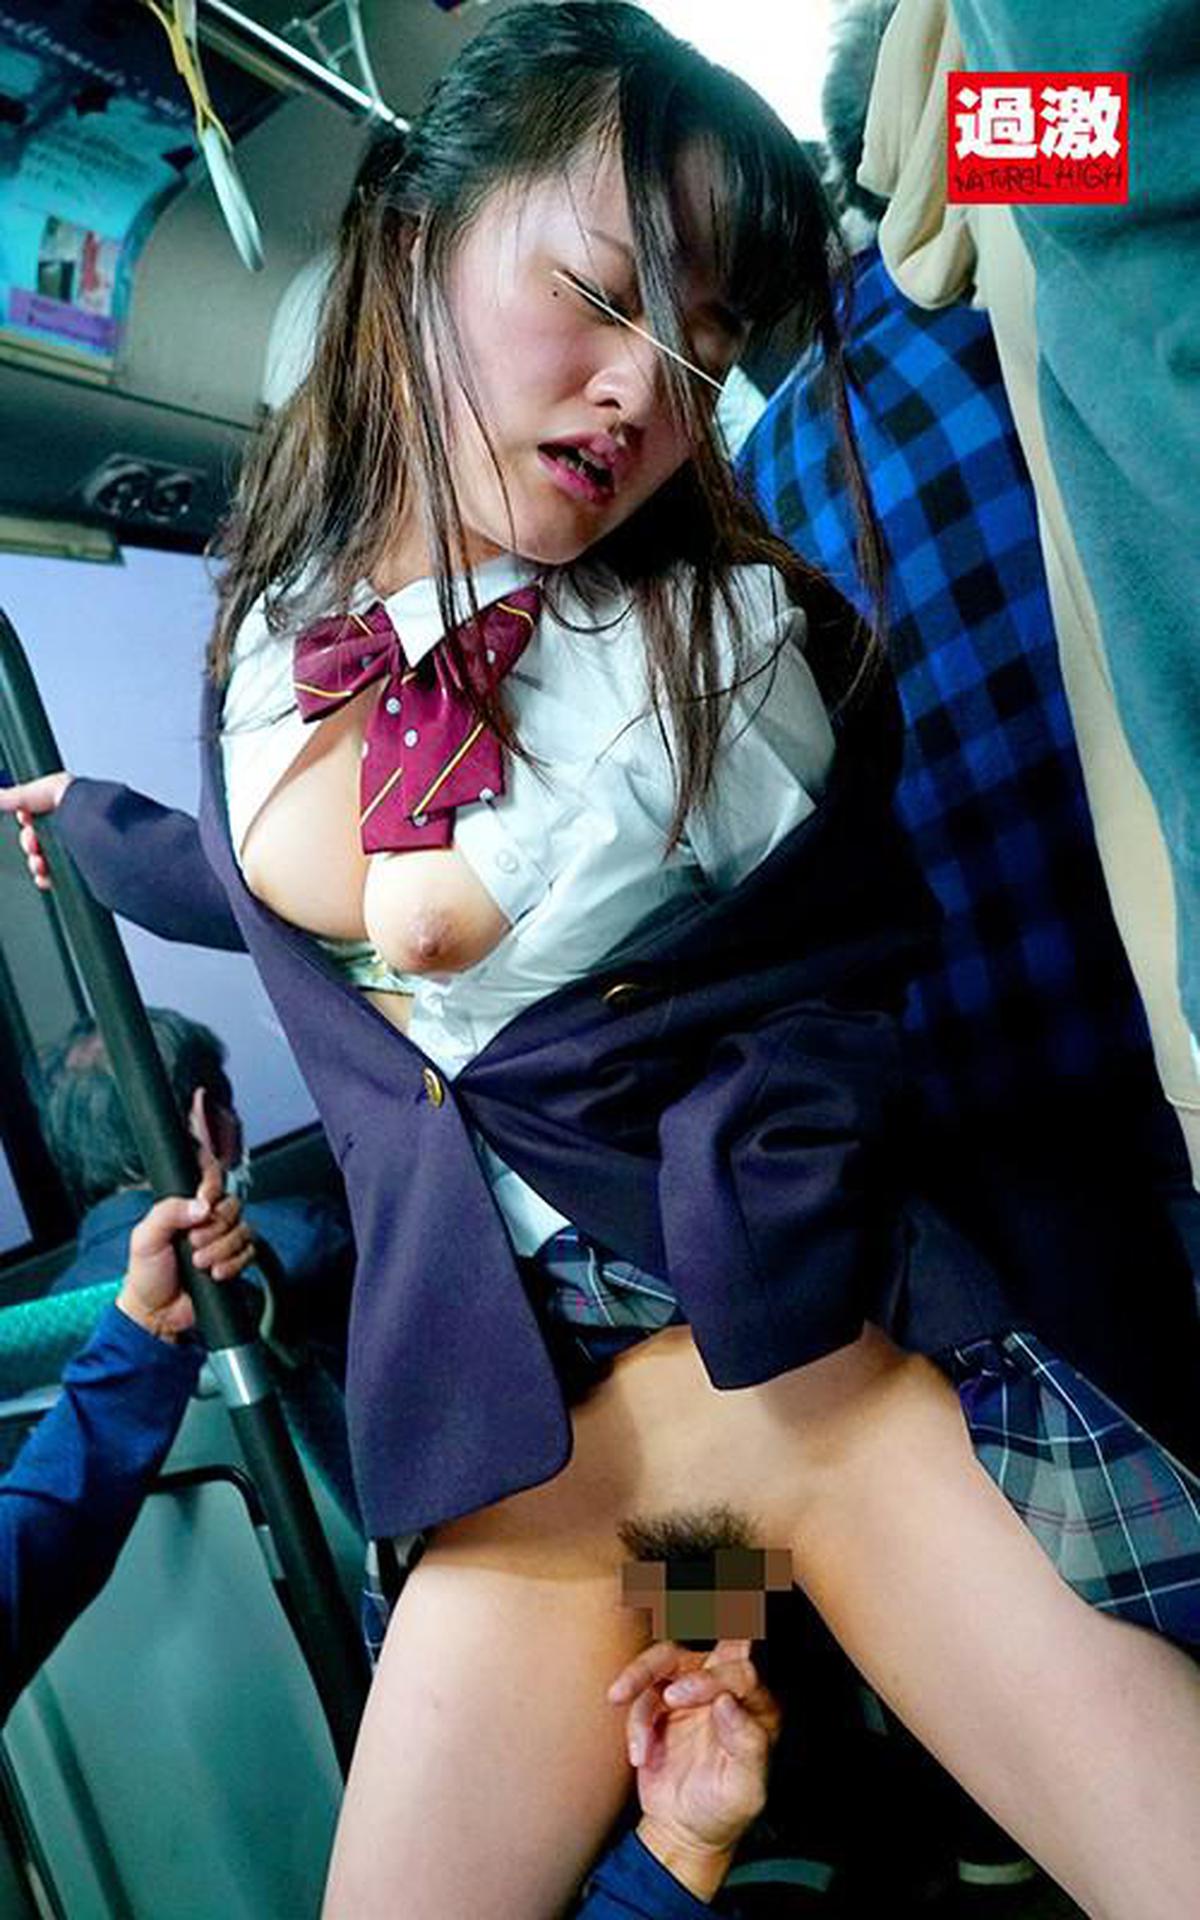 NHDTB-404 Big Breasts Girls ○ Raw 10 Who Are Soggy From Behind Through A Uniform On A Crowded Bus